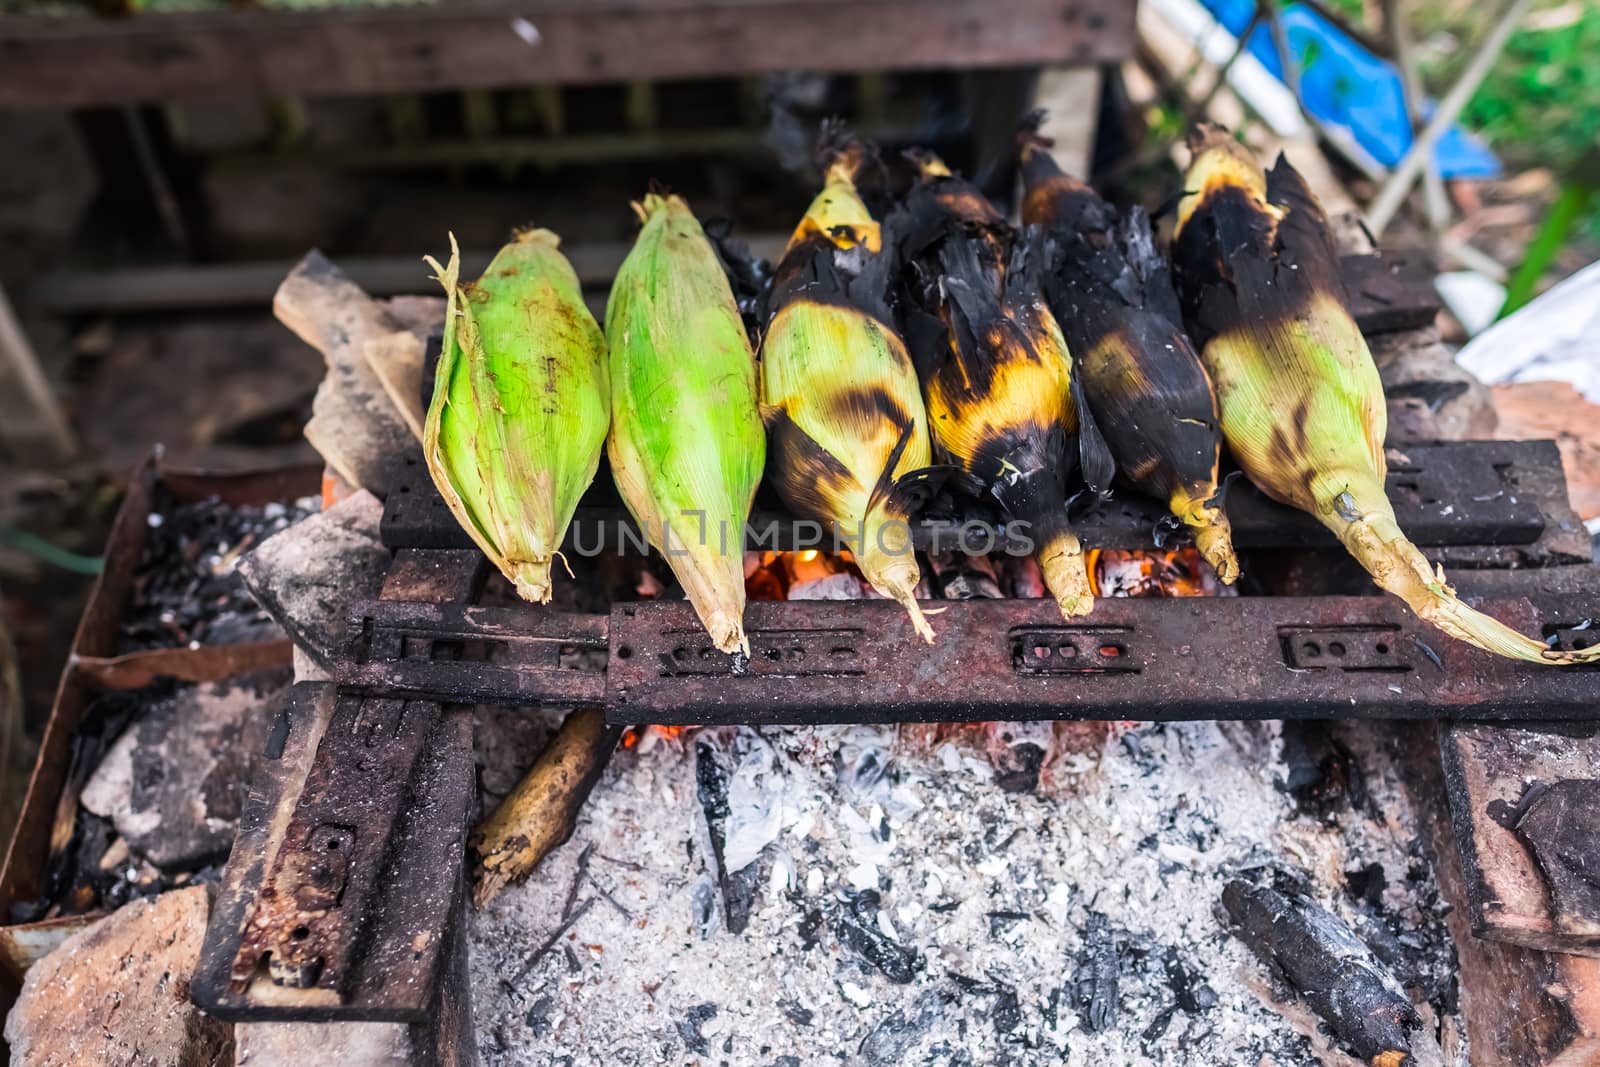 Grilled or Barbecue Corns Sold in Roadside Stall in Borneo